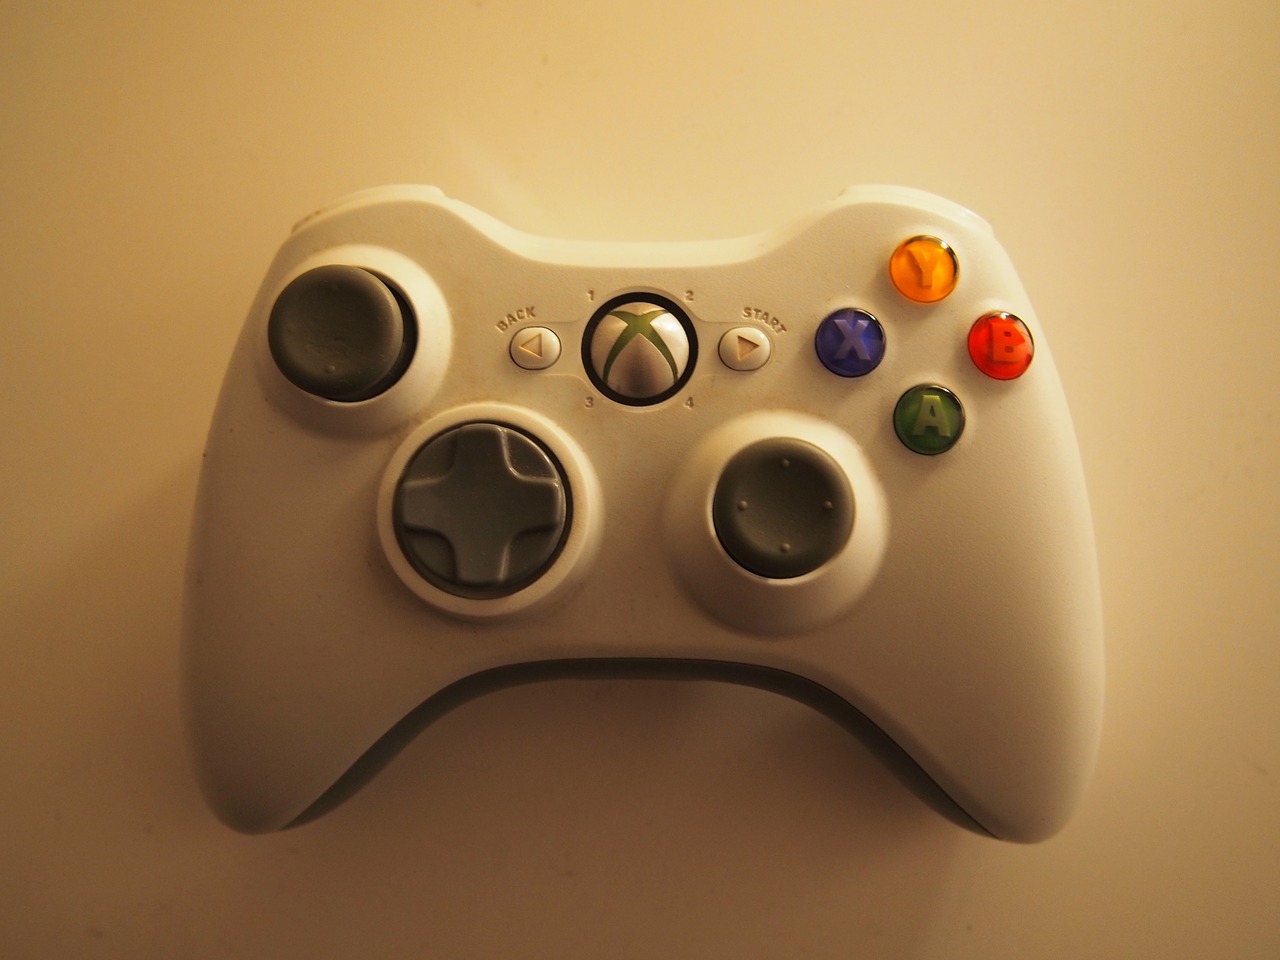 xbox controller video games free photo